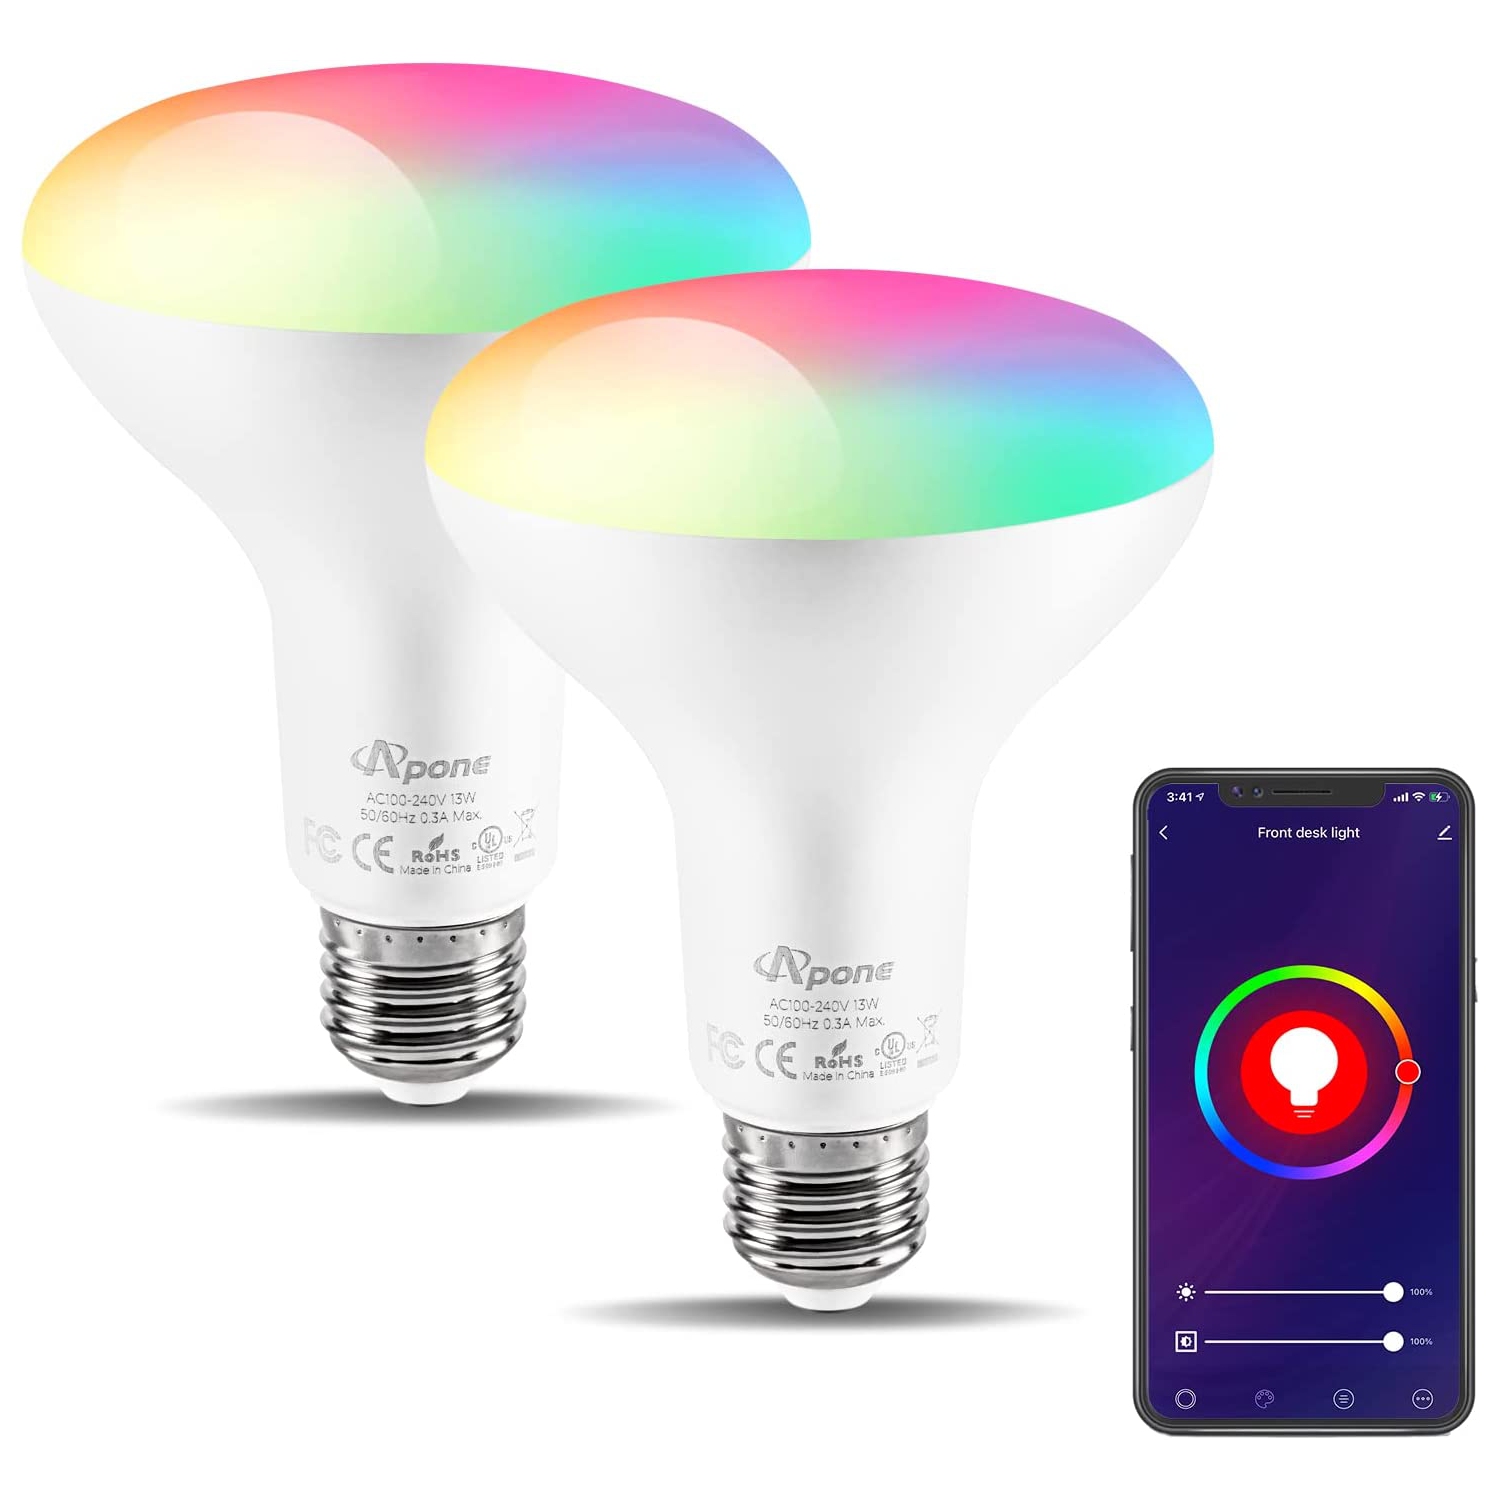 Apone Smart LED Colorful Light Bulb 13W, with Alexa and Google Assistant, Wireless WiFi App Control (2 Pack)